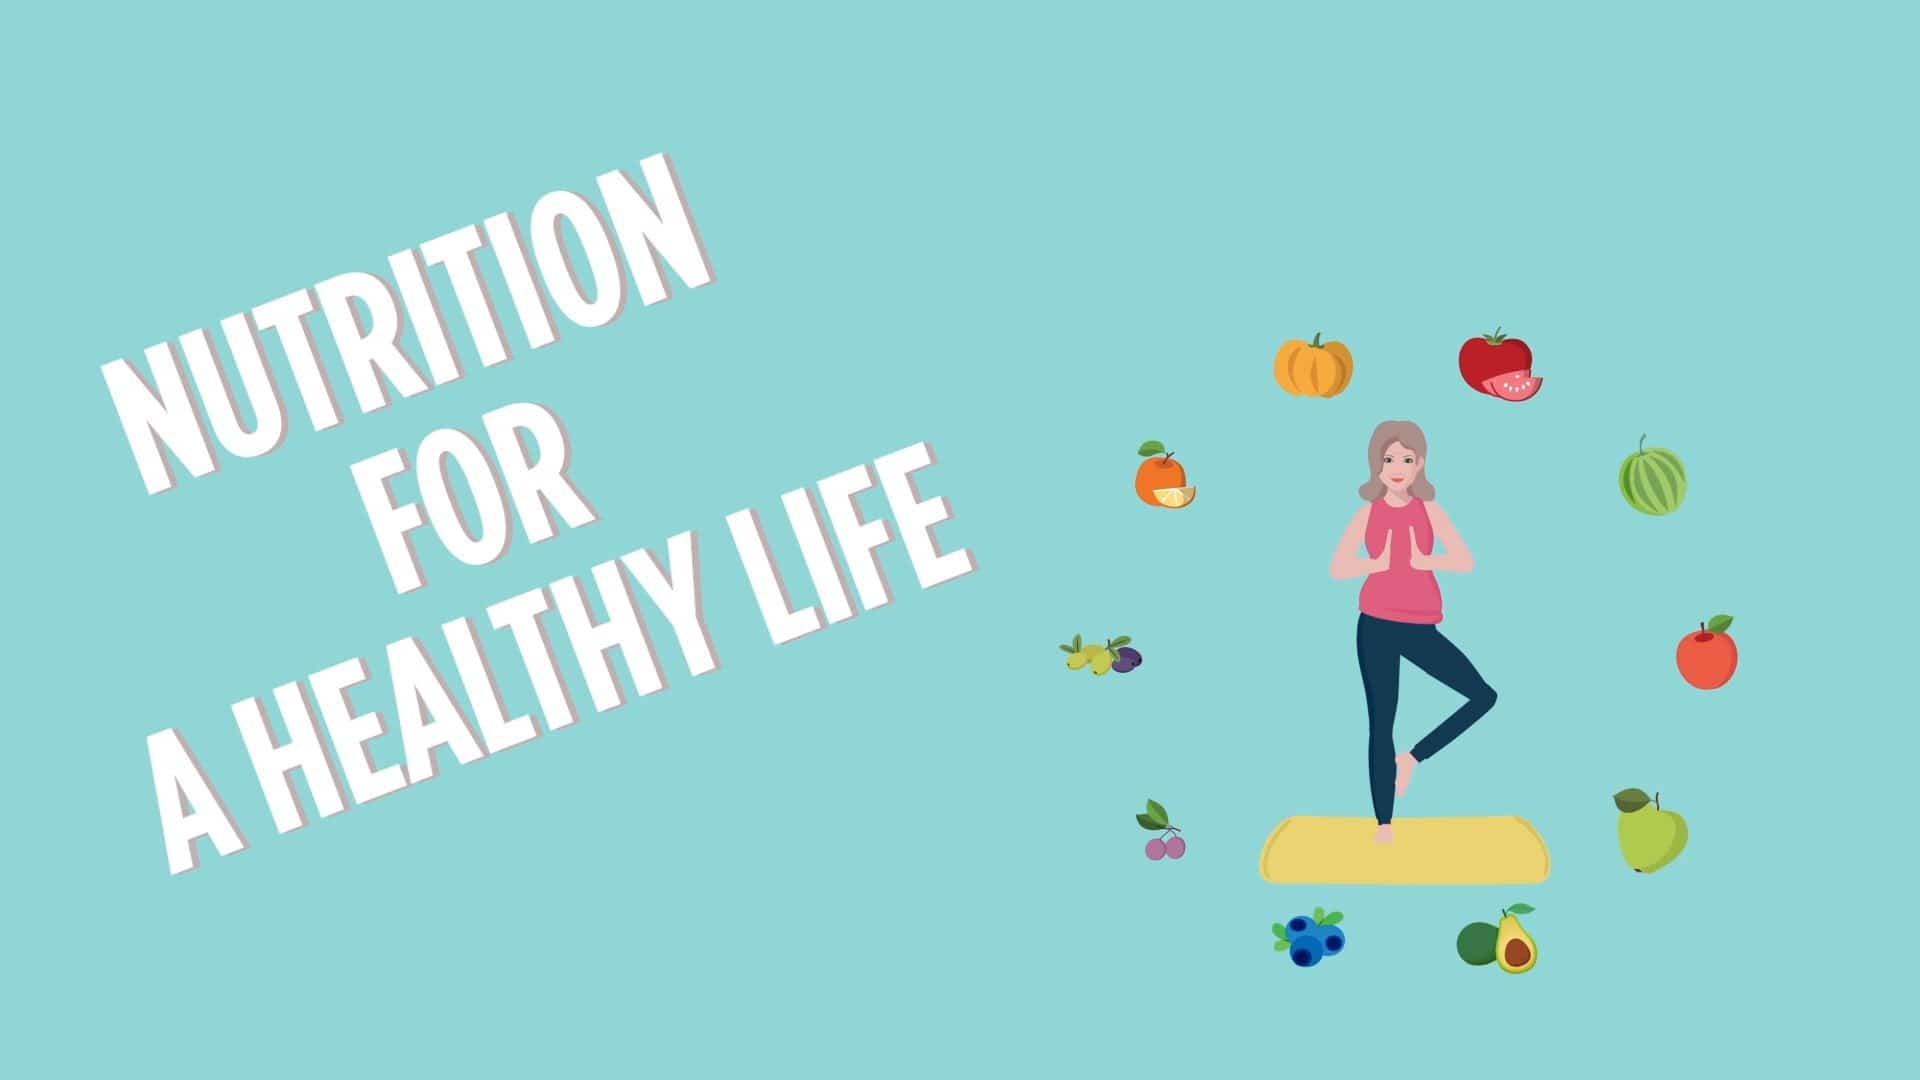 Cartoon of healthy food and woman doing yoga with text "nutrition for a healthy life."